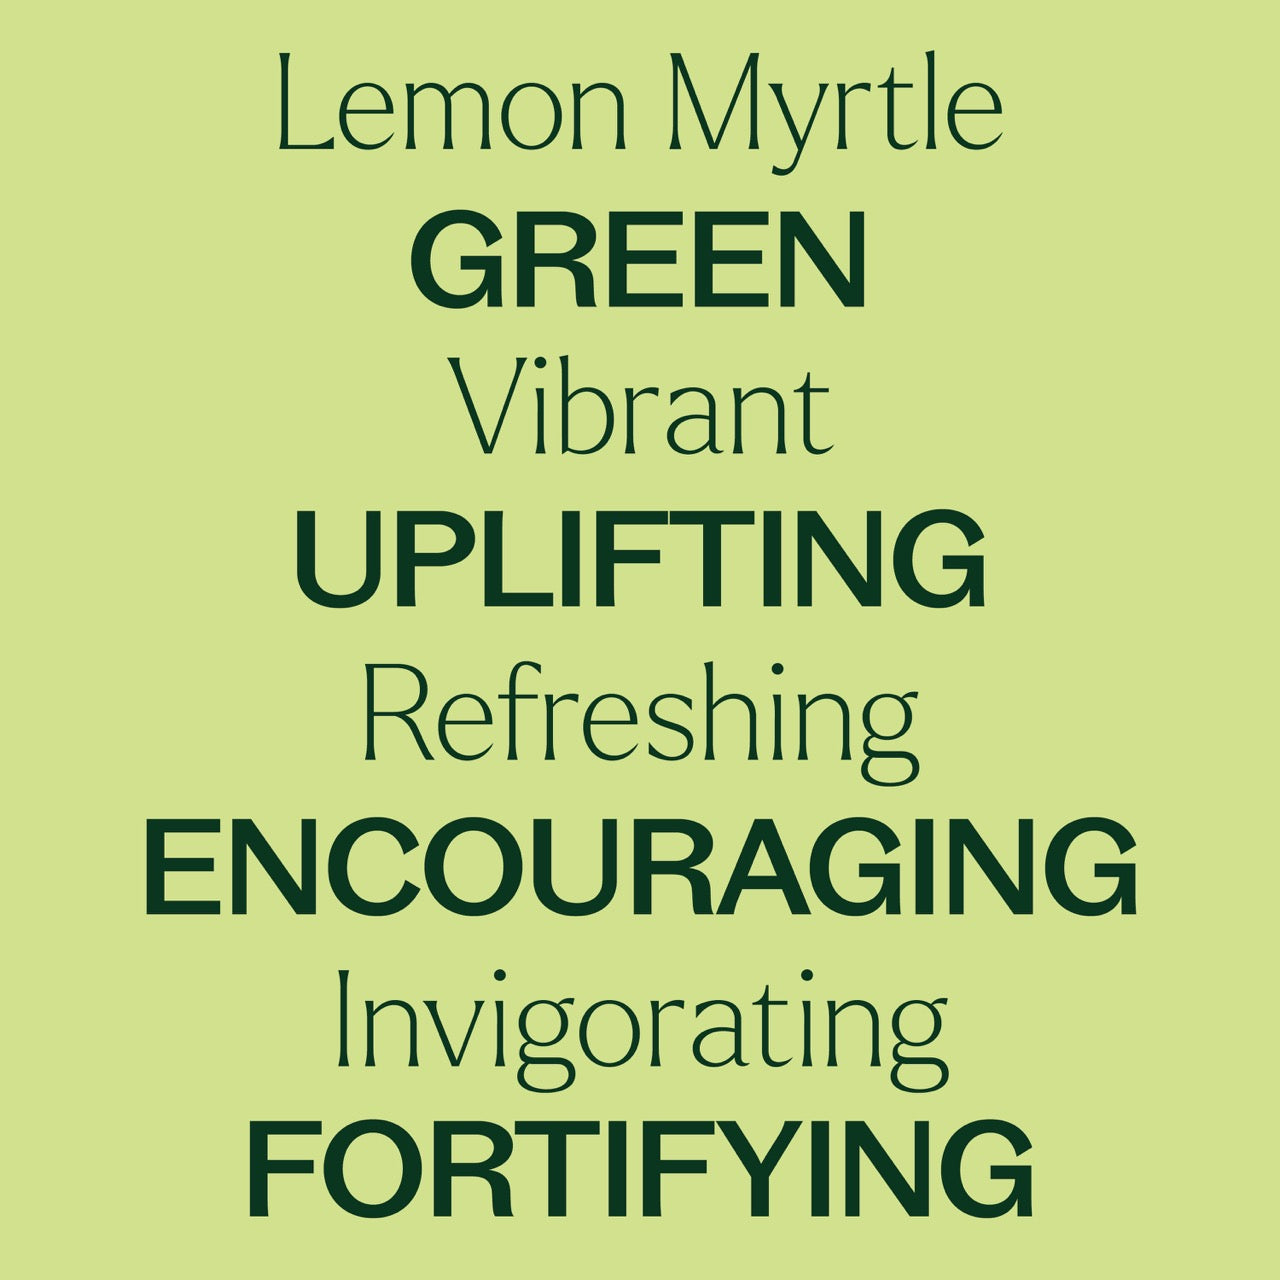 Key features of Lemon Myrtle Essential Oil: Green, vibrant, uplifting, refreshing, encouraging, invigorating, fortifying